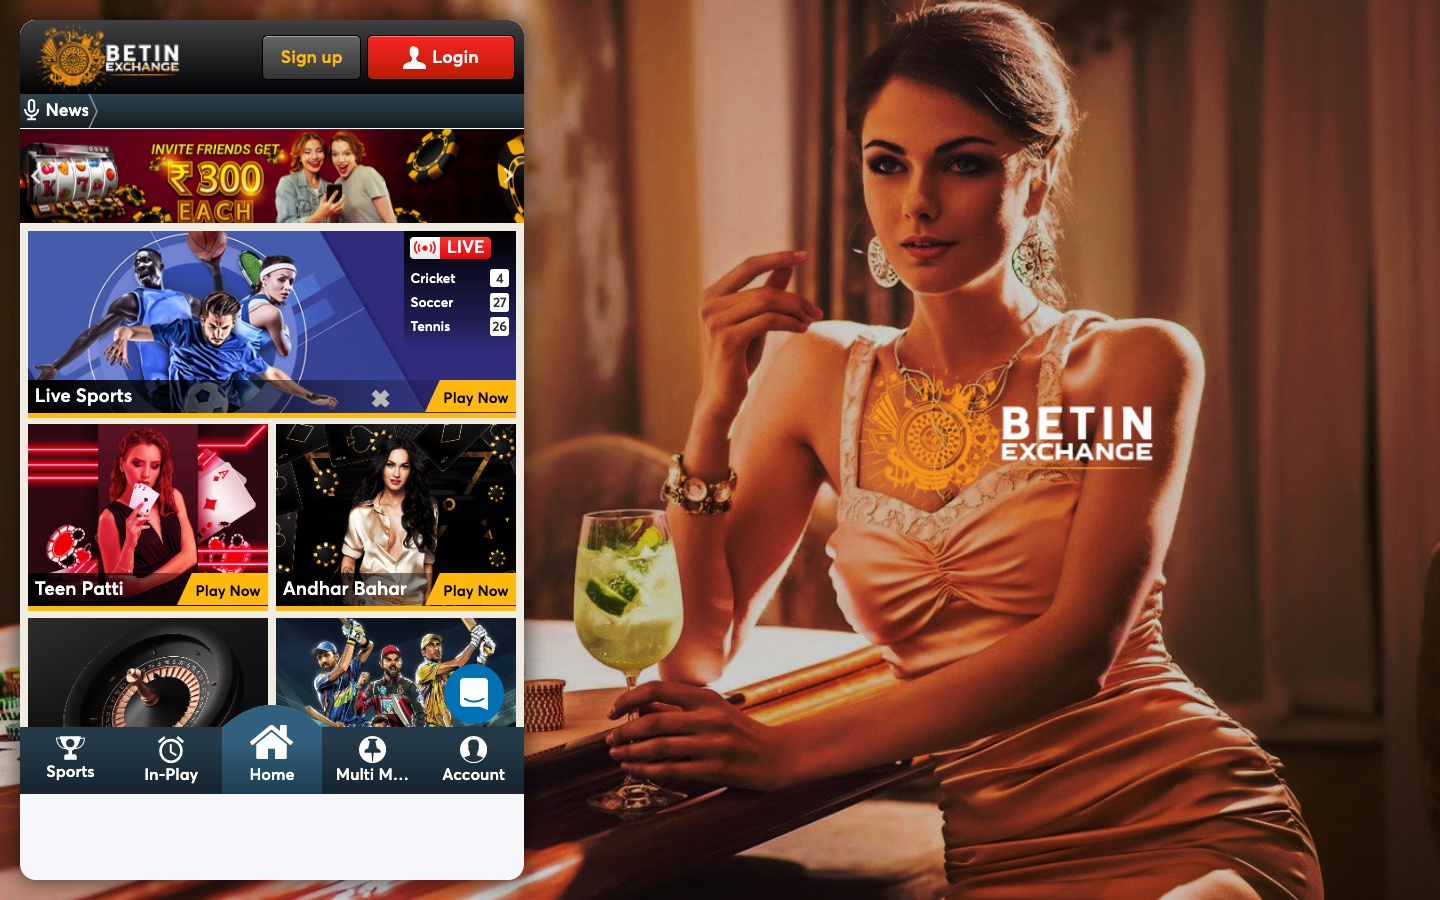 Gamble Alive Gambling establishment and Sports betting Games Online That have BetInExchange To help you Earn Grand Rewards